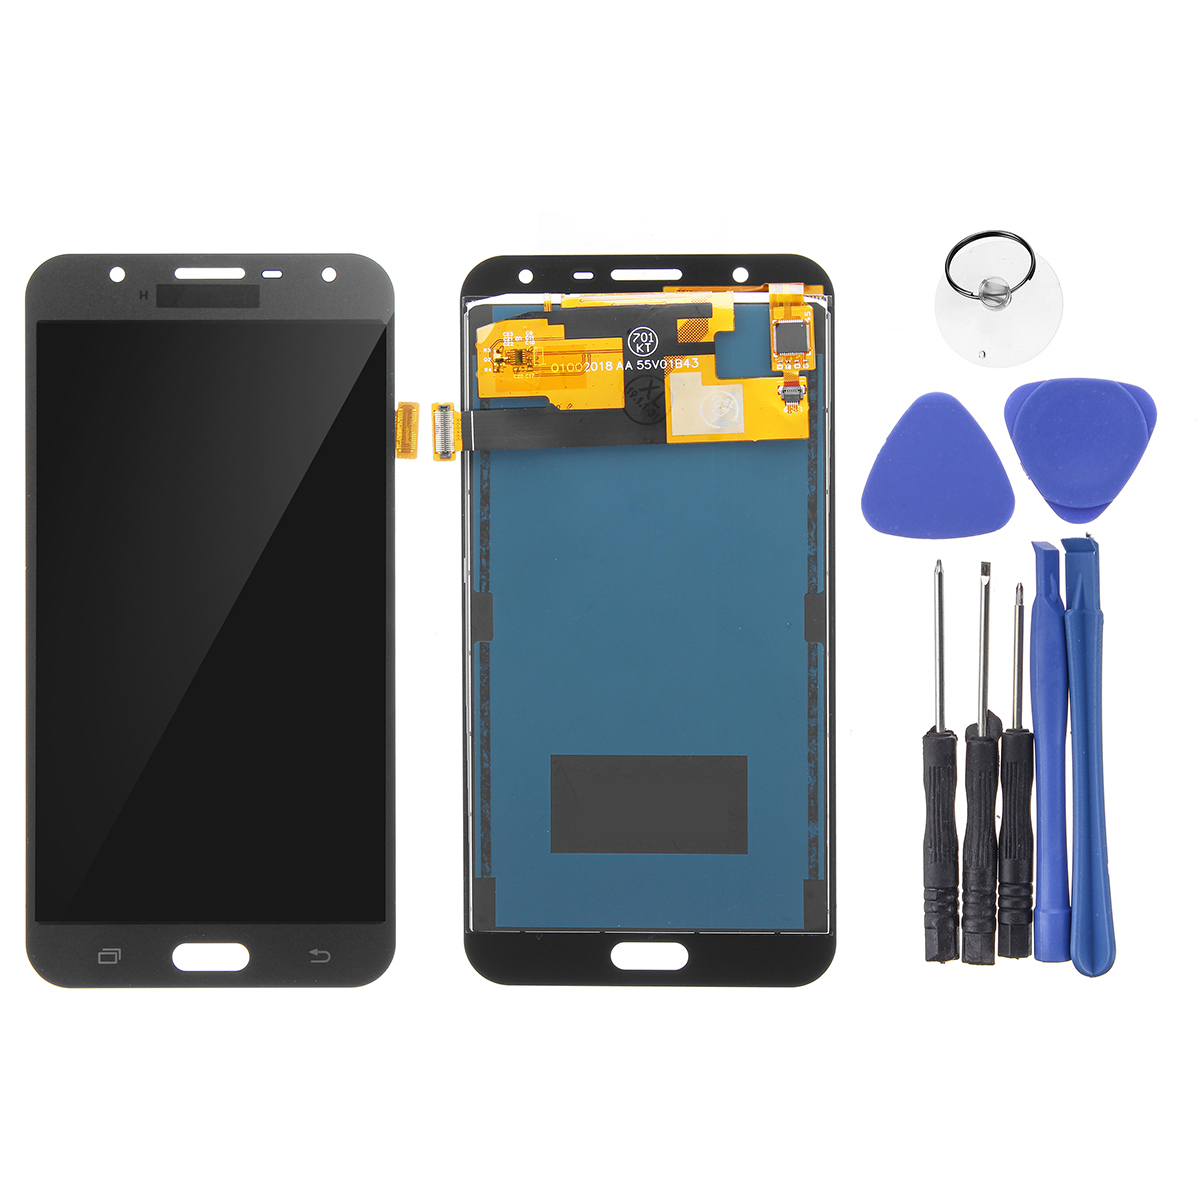 

LCD Display + Touch Screen Digitizer Replacement With Repair Tools For Samsung Galaxy J7 Neo J701F J701M